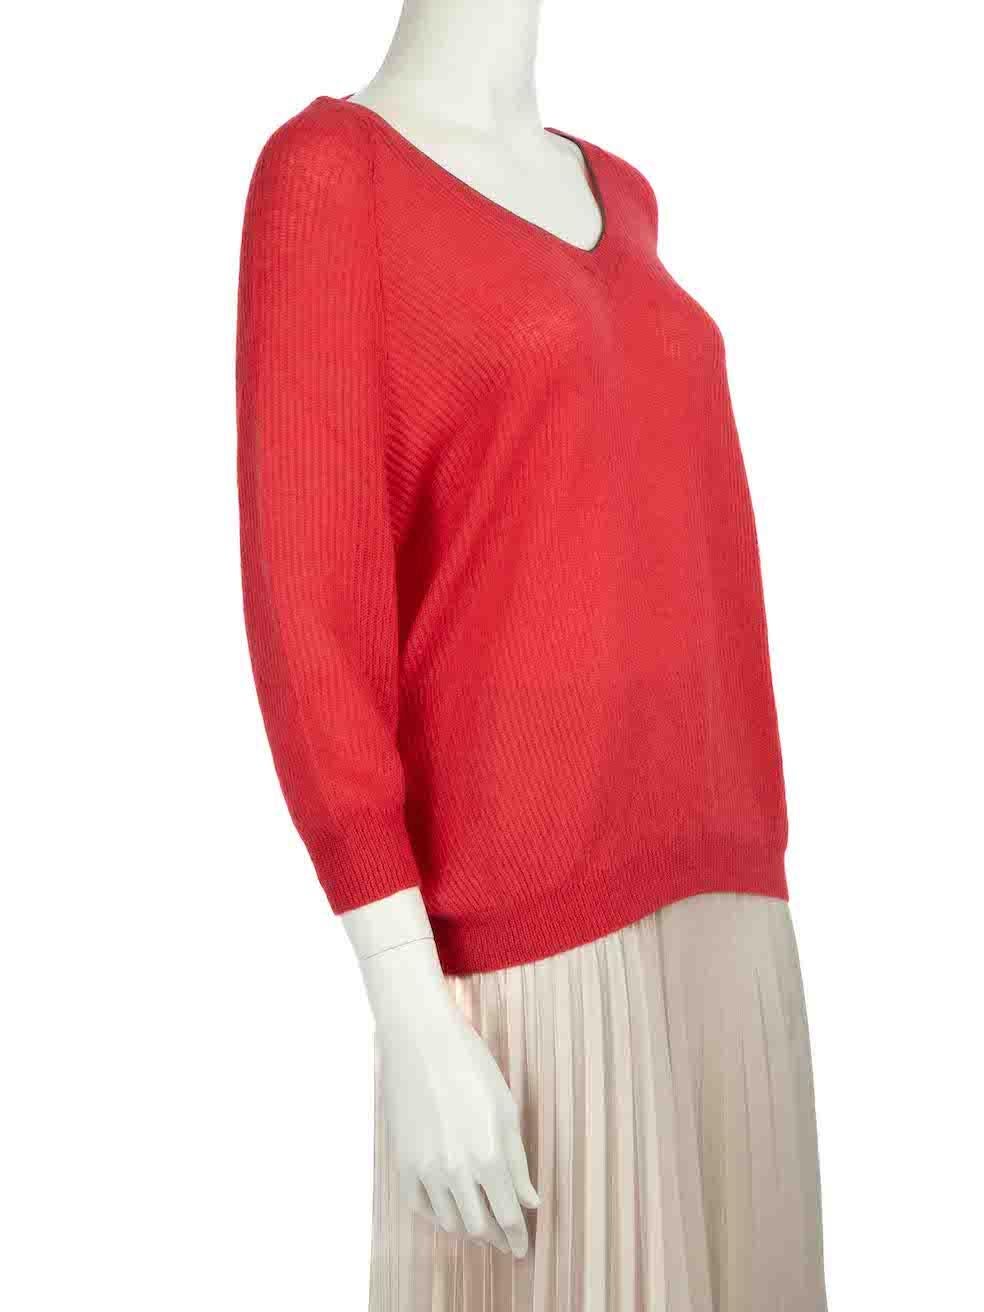 CONDITION is Very good. Hardly any visible wear to jumper is evident on this used Brunello Cucinelli designer resale item.
 
 
 
 Details
 
 
 Red
 
 Synthetic
 
 Knit jumper
 
 V-neck
 
 Beaded neckline
 
 Long sleeves
 
 
 
 
 
 Made in Italy
 
 
